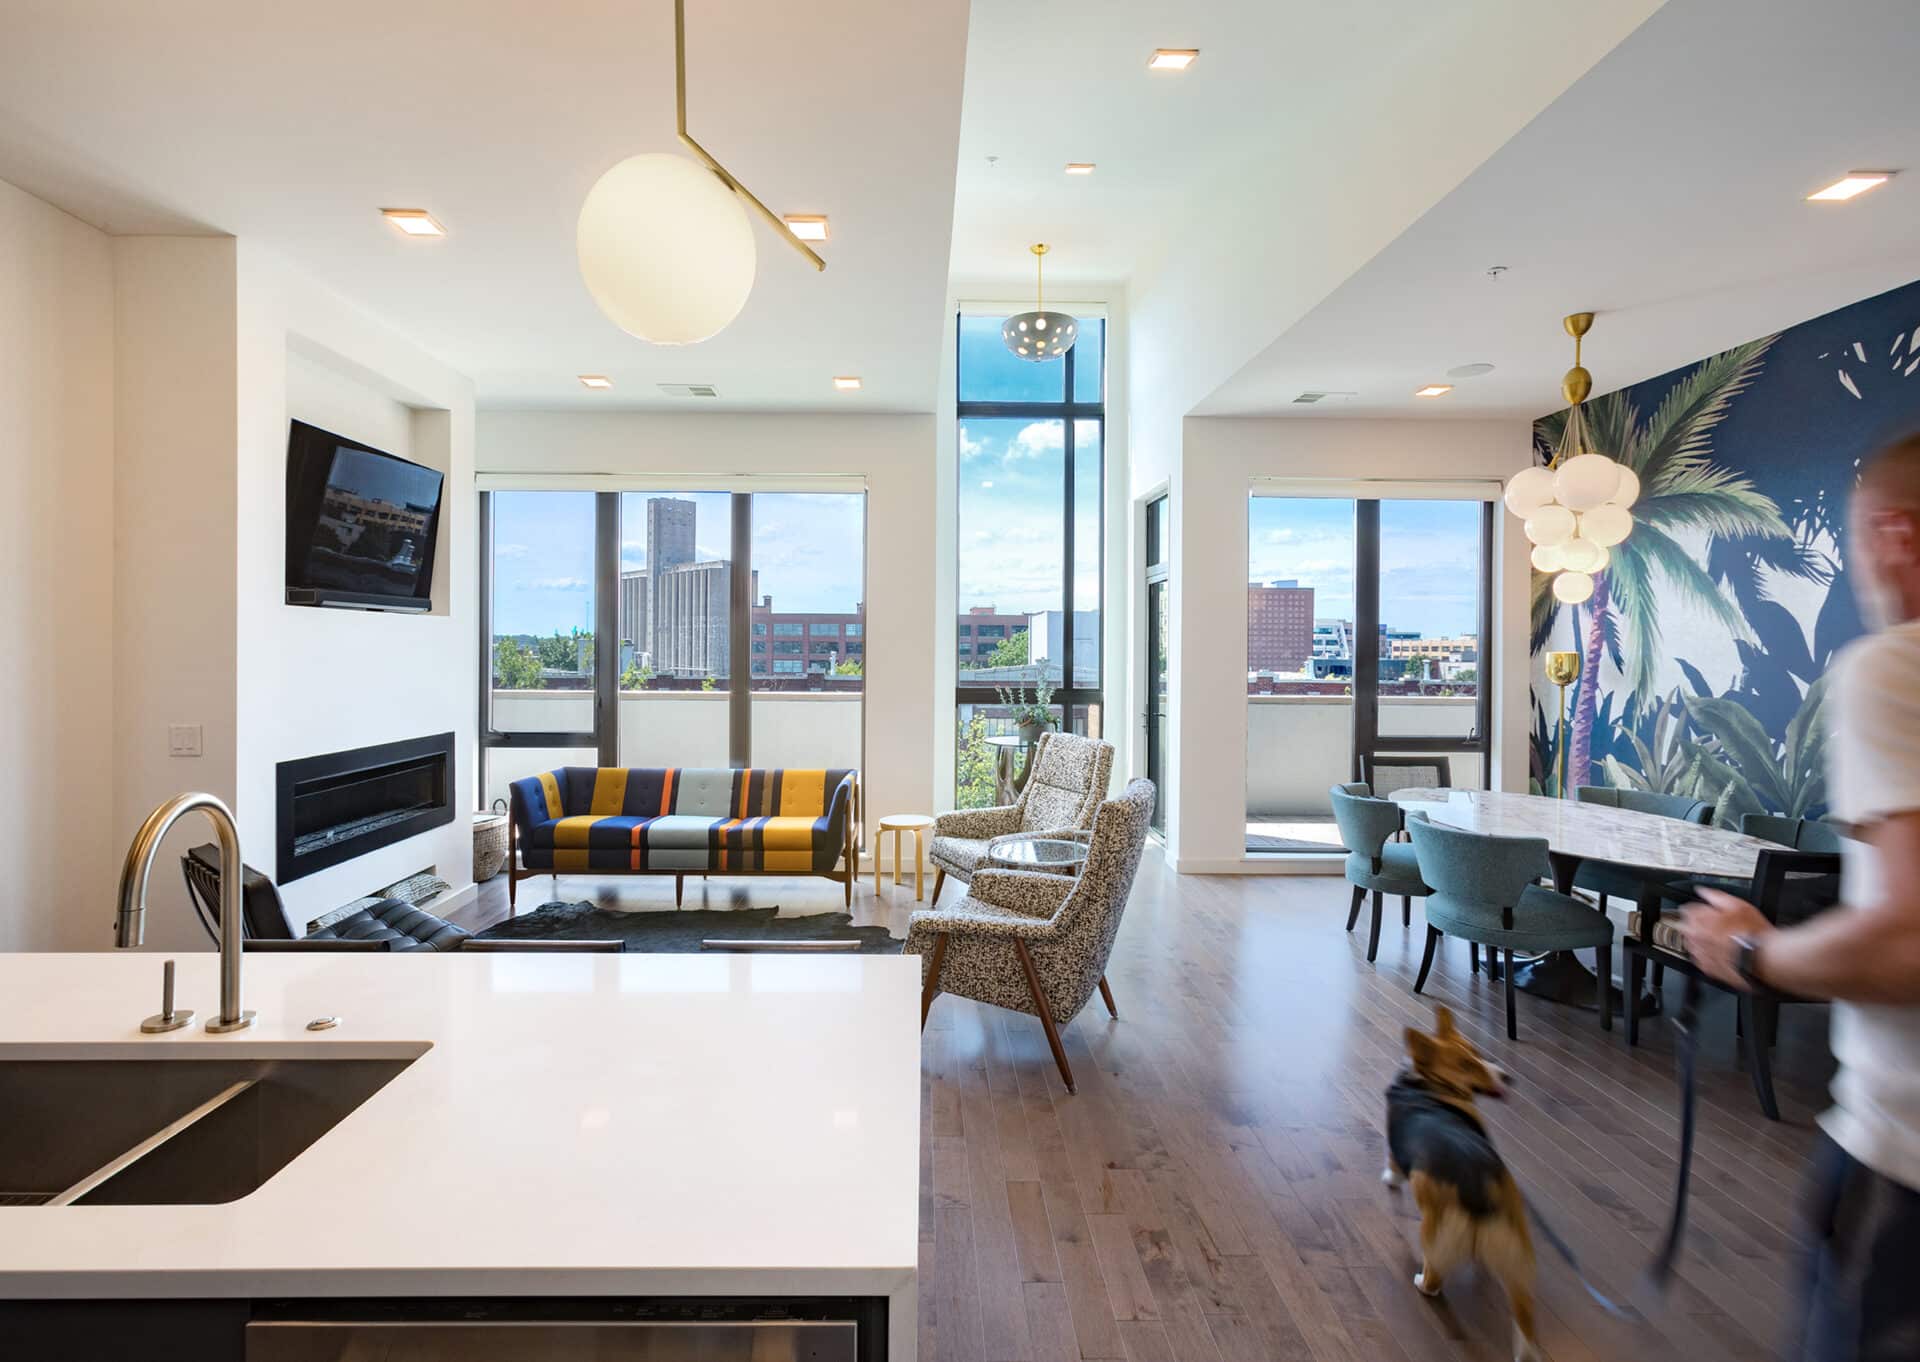 interior of laclede apartment unit designed by trivers architectural firm in st. louis